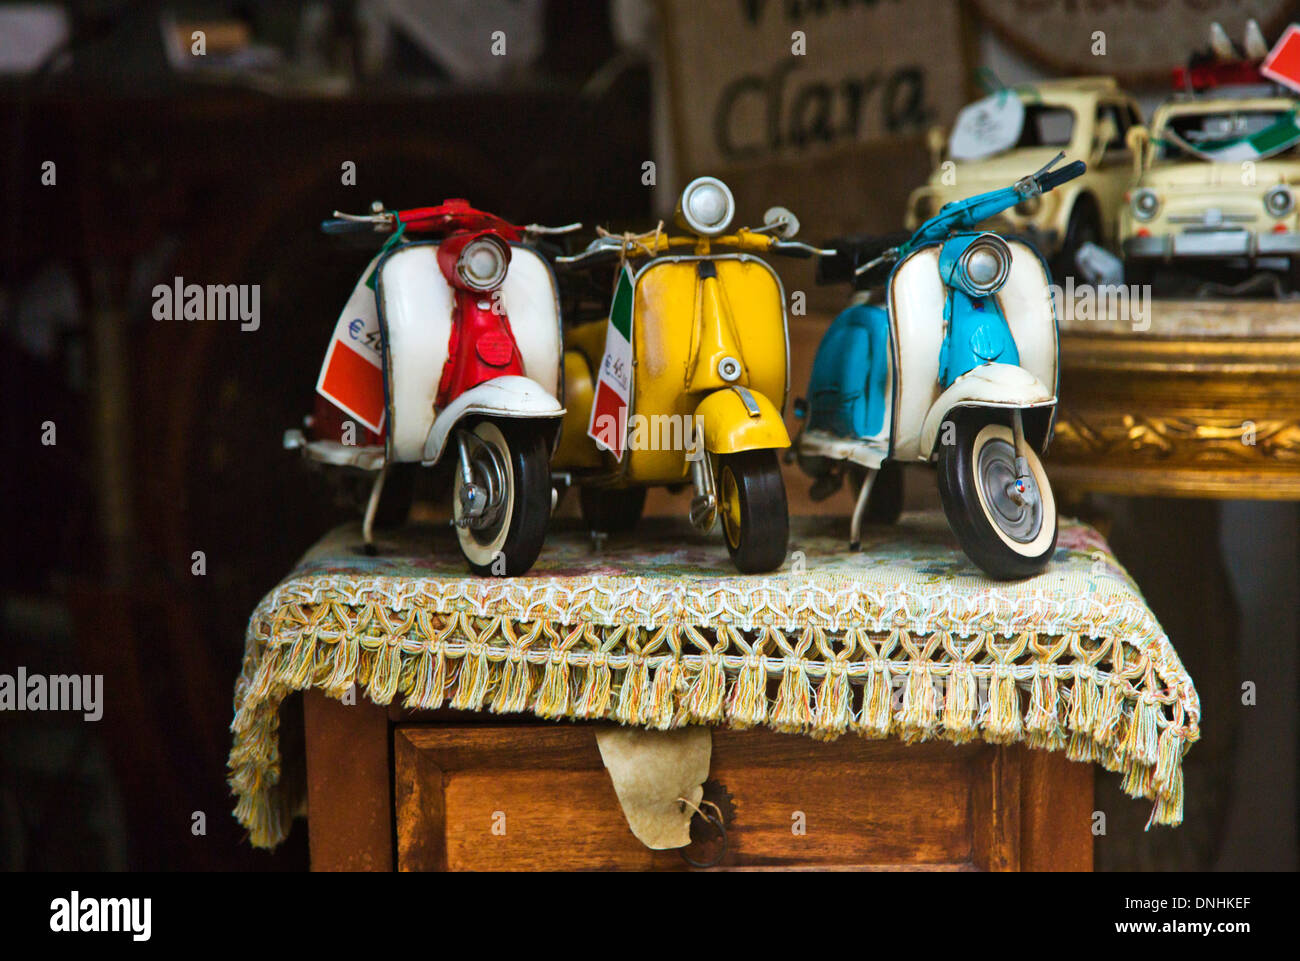 Close-up of toy scooters for sale, Amalfi, Province of Salerno, Campania, Italy Stock Photo